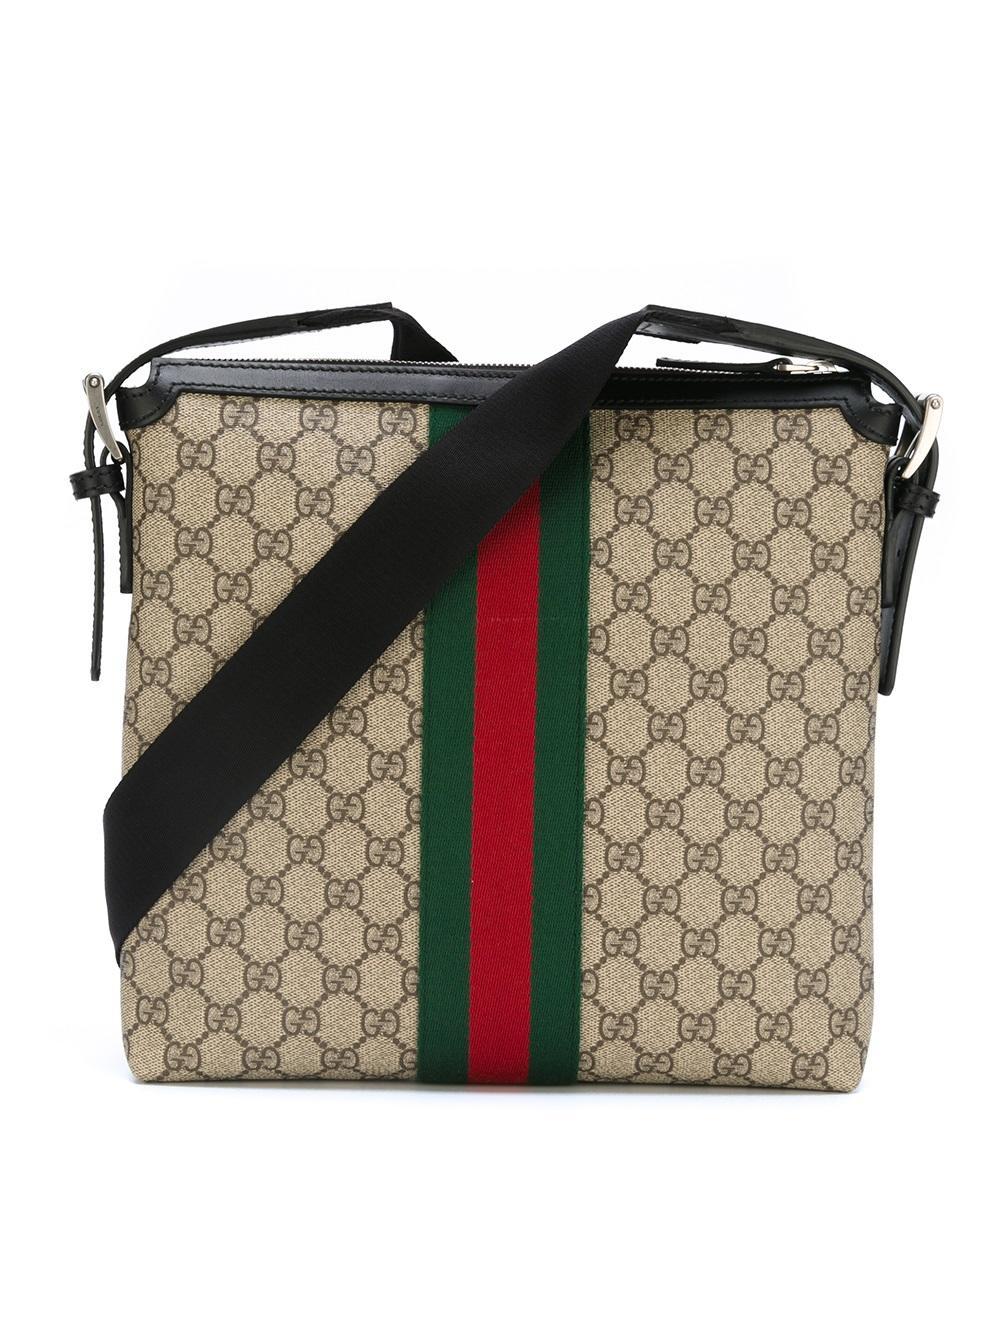 Gucci Cotton Gg Supreme Messenger Bag With Web Detail in Black for Men - Lyst